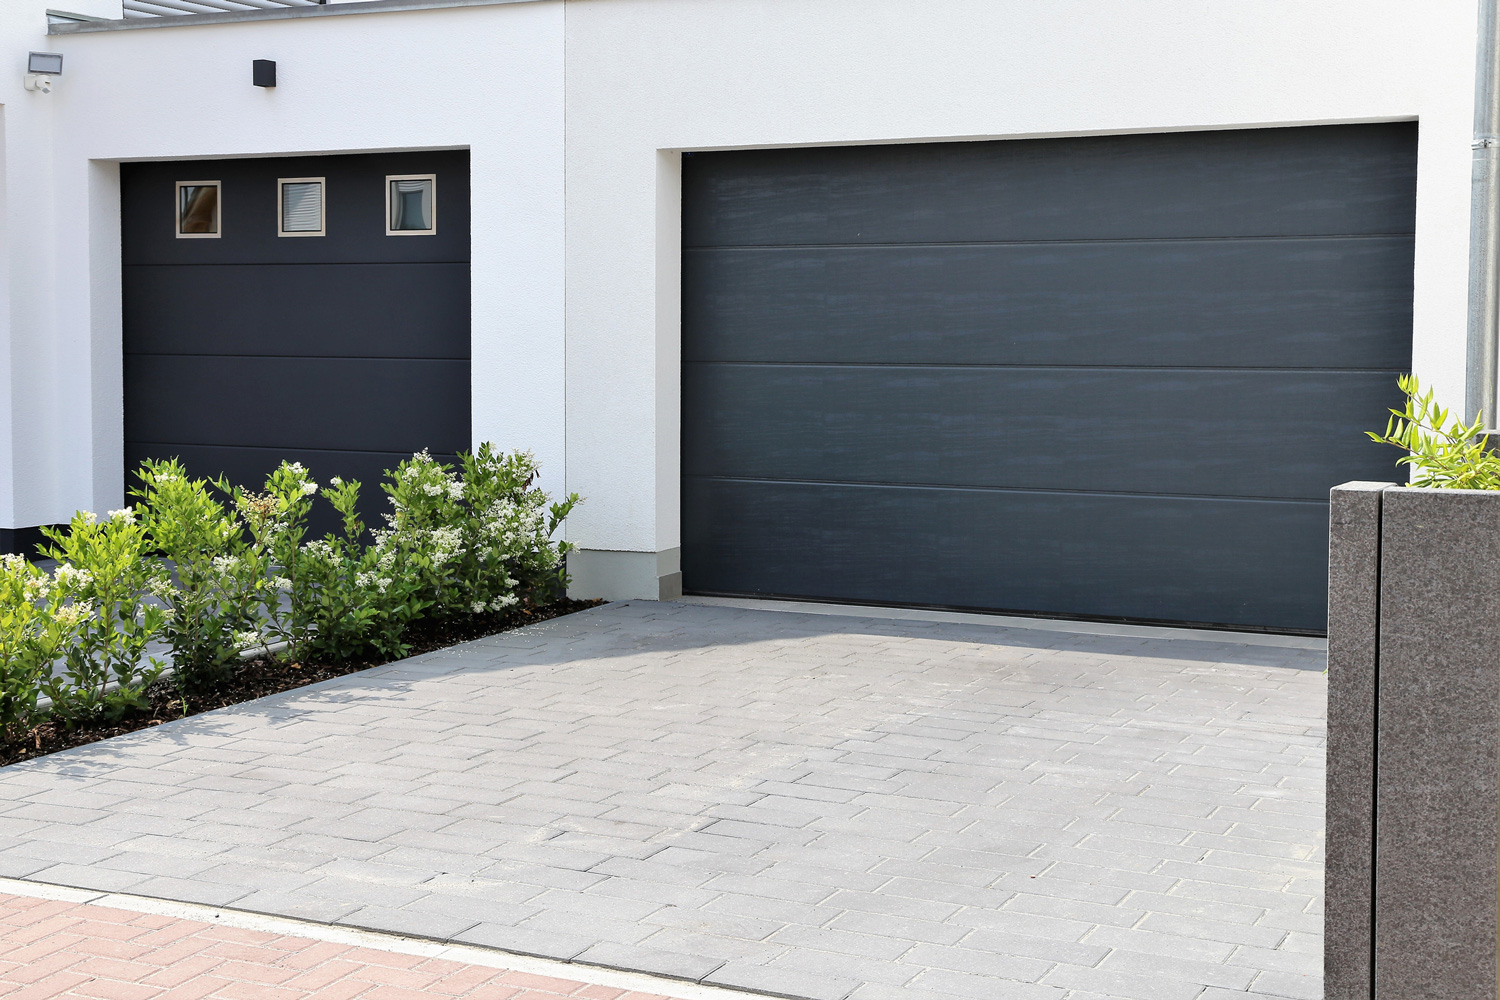 Two modern new garage doors (sectional doors) in a residential district